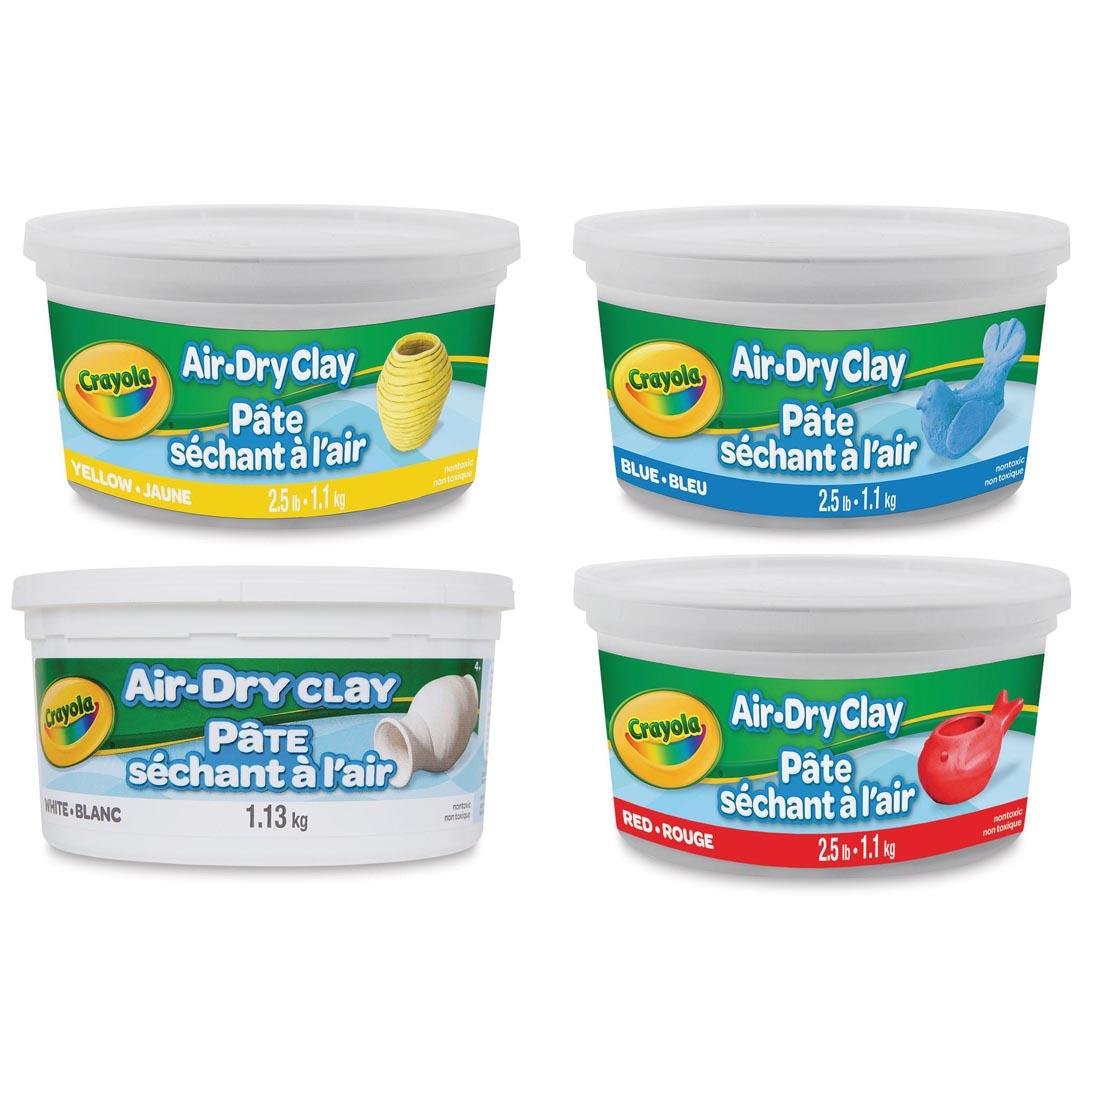 Four tubs of Crayola Air-Dry Clay from the 10 lb. Bulk Package